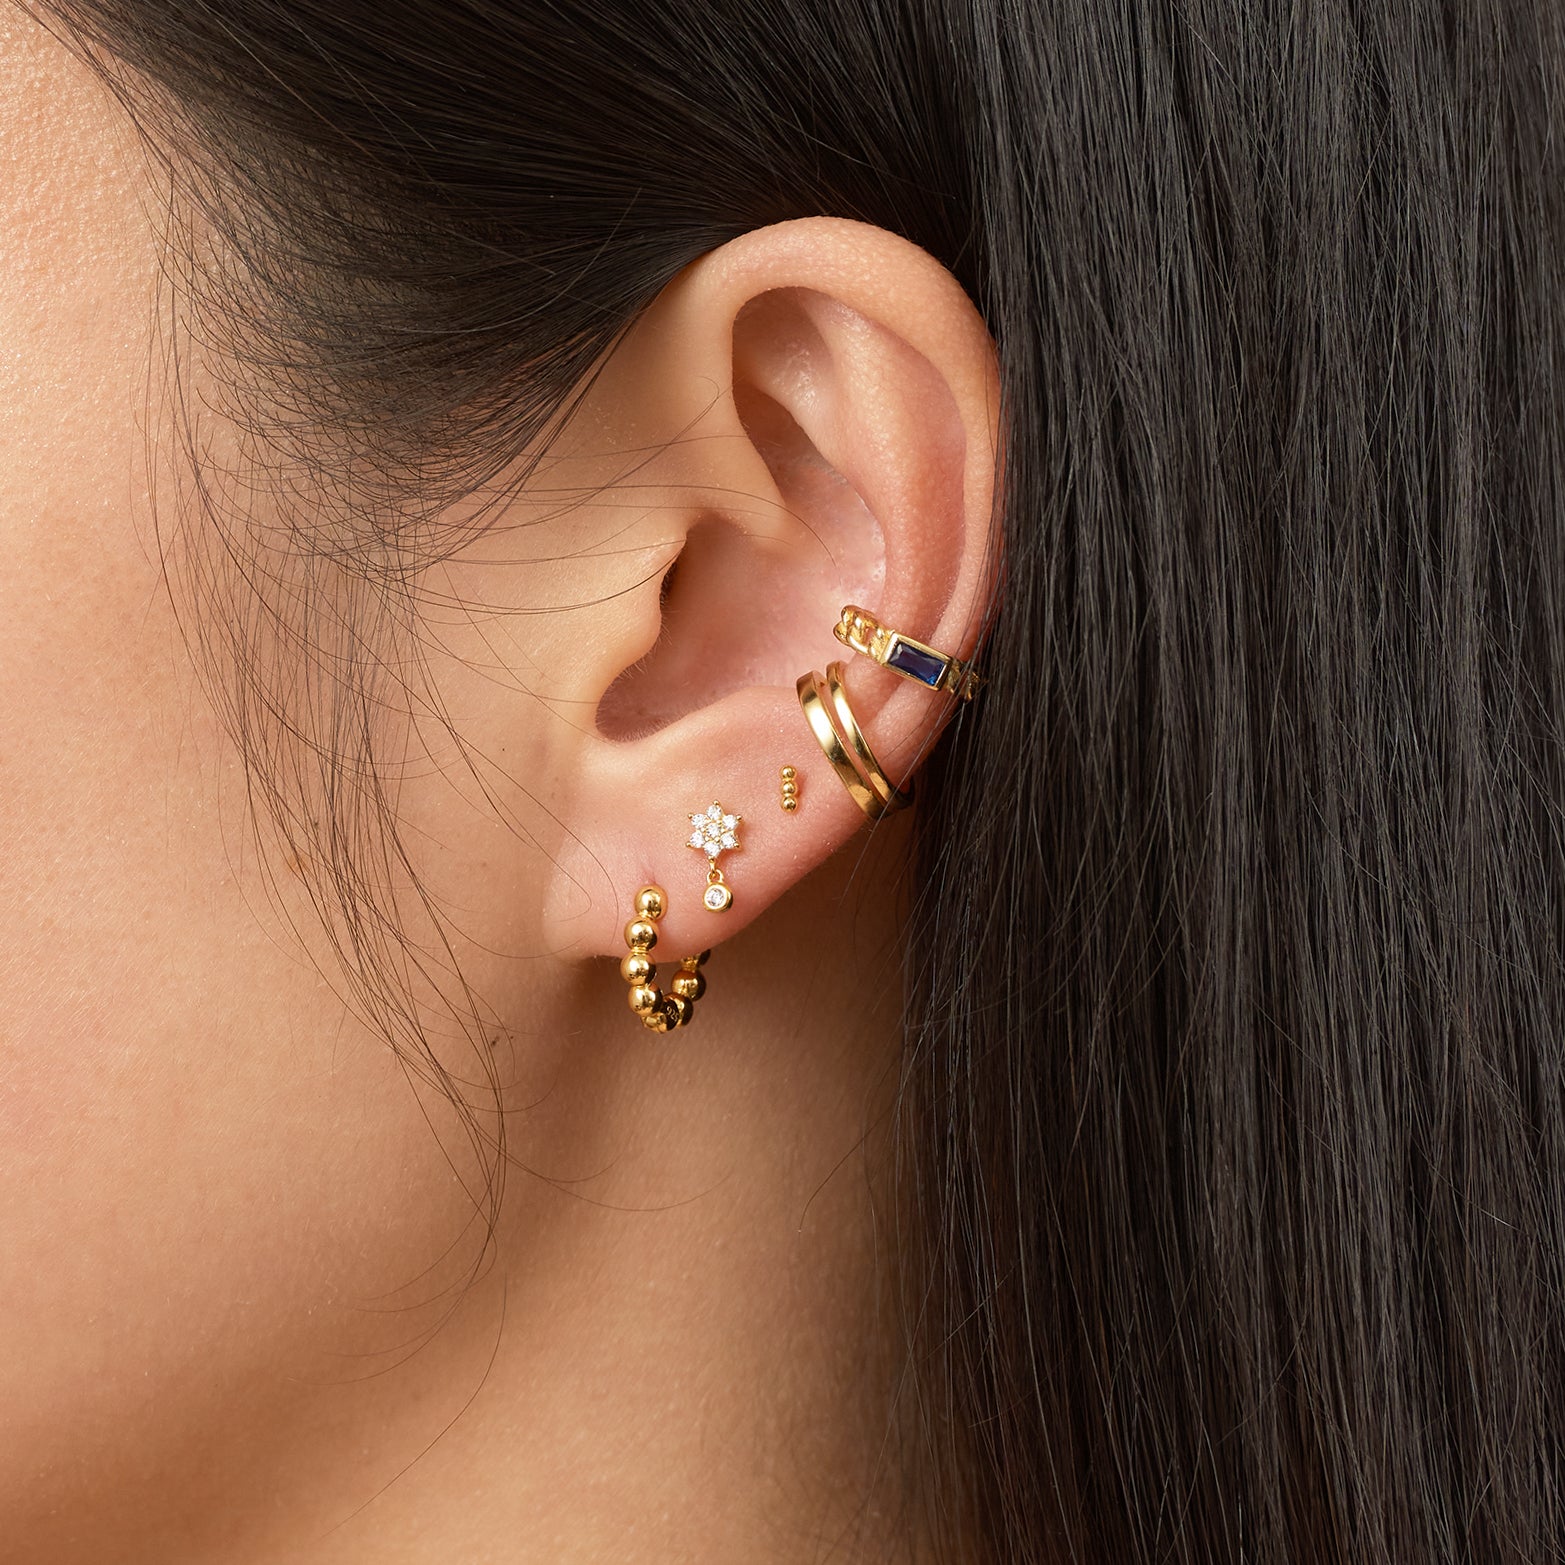 Everyday fine/semi-fine earrings in NYC that not irritate your ears –  Tagged \